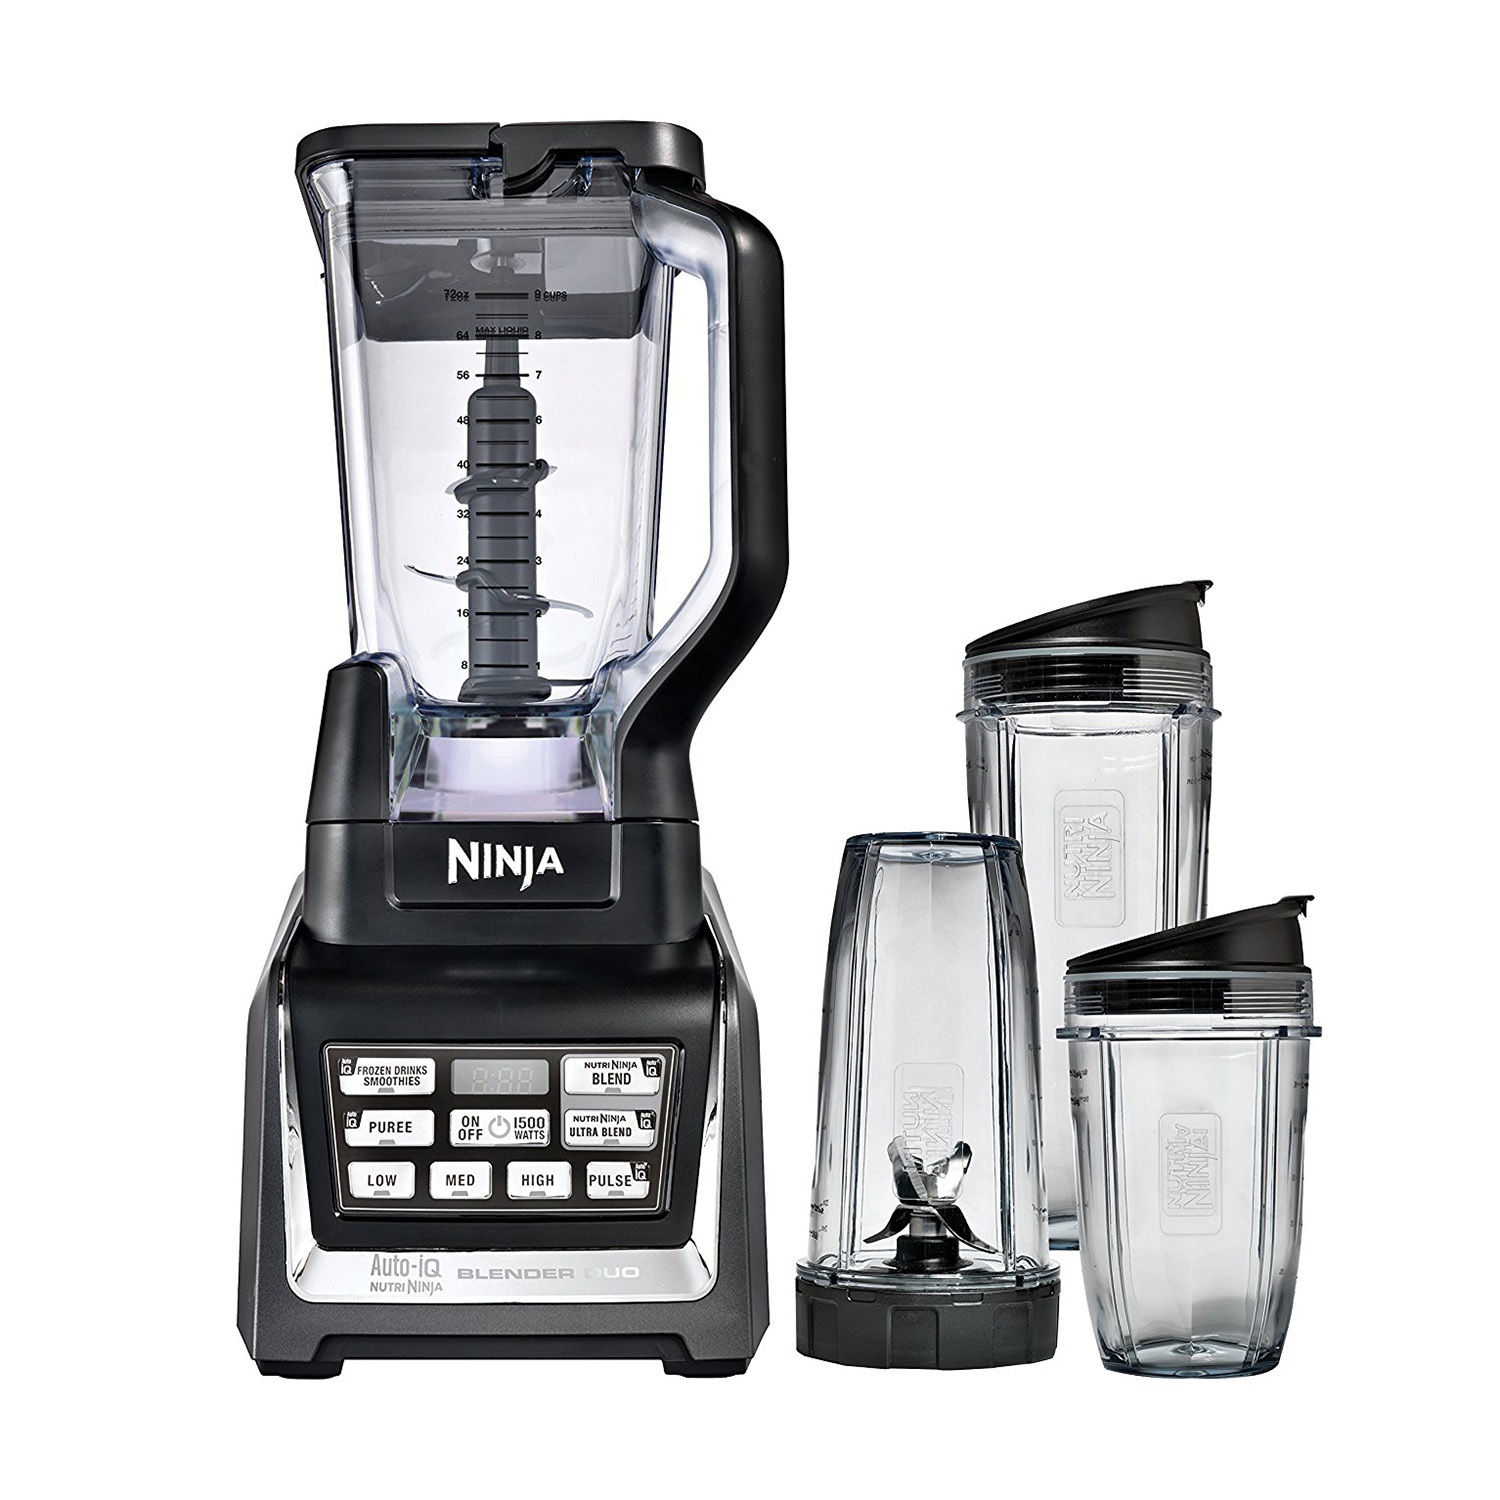 Nutri Ninja 1500W blender duo with Auto-iQ and cups for $100, free shipping